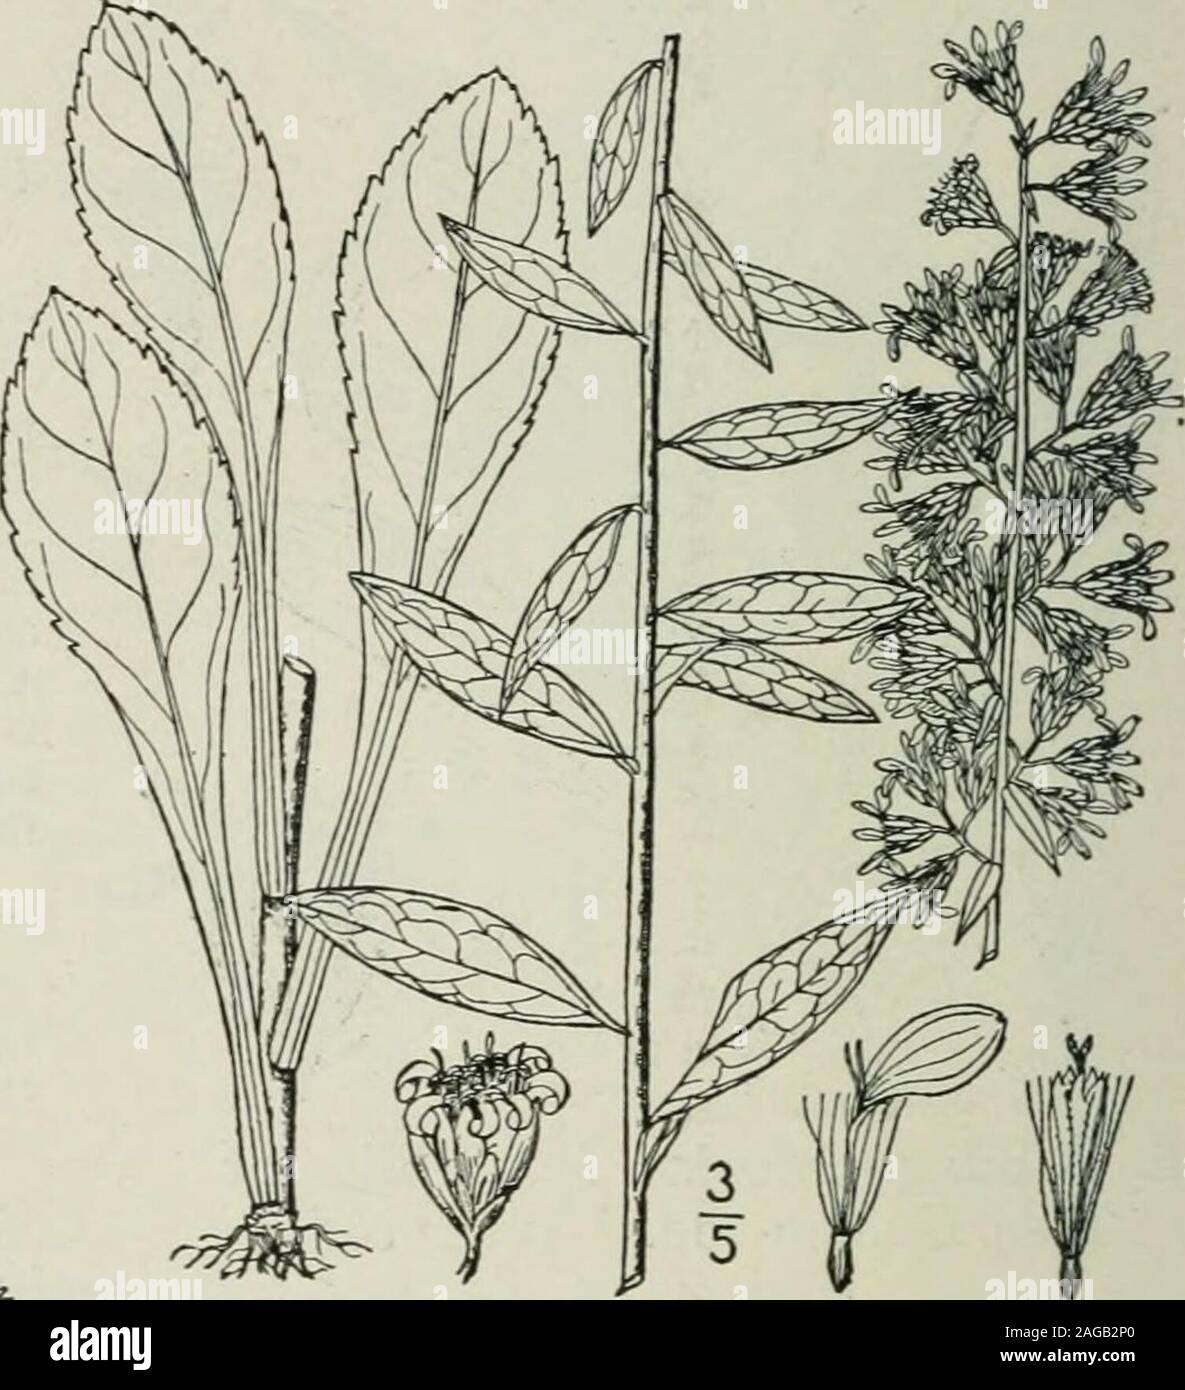 . An illustrated flora of the northern United States, Canada and the British possessions : from Newfoundland to the parallel of the southern boundary of Virginia and from the Atlantic Ocean westward to the 102nd meridian. 9. Solidago monticola T. & G. ^Mountain Golden-rod.Fig. 4221. Solidago Curtisii var. monticola T. & G. Fl. N. A. 2 : 200. 1841.Solidago monticola T. & G.; Chapm. Fl. S. States 209. i860. Slender, glabrous or nearly so, i°-3°high. Stem leaves ovate-oblong, or ob-long-lanceolate, thin, acuminate at theapex, narrowed at the base, sharply andsparingly serrate, or the upper entire Stock Photo